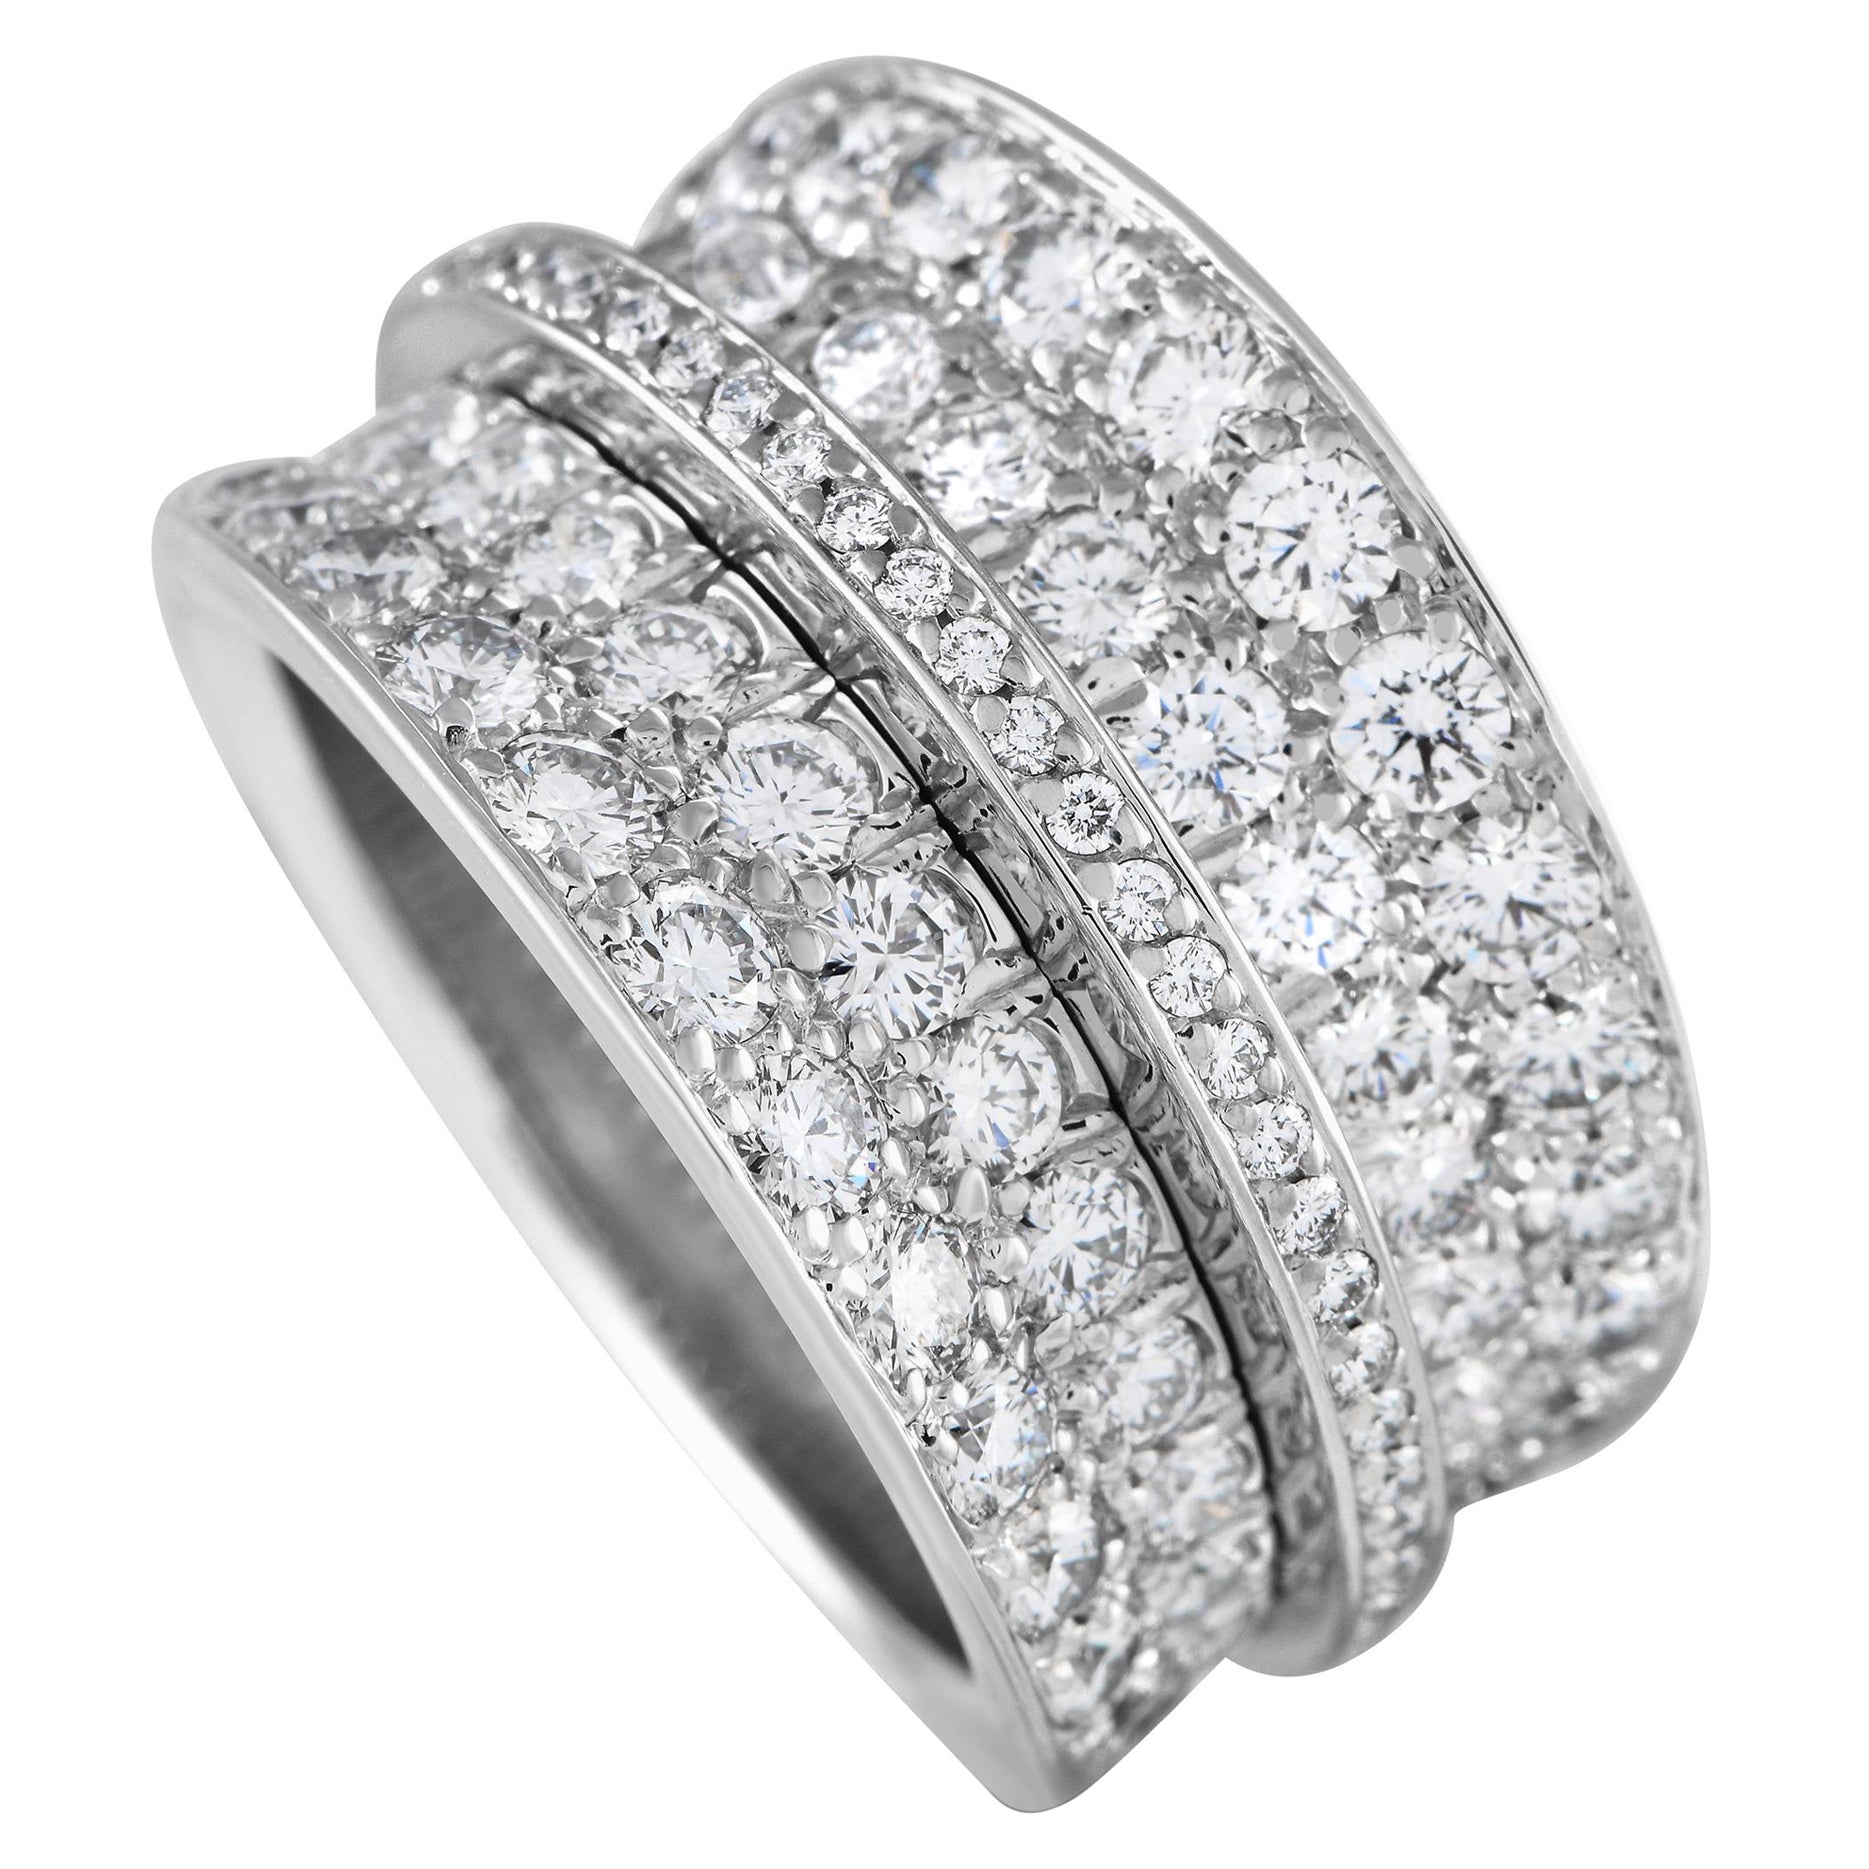 Cartier 18K White Gold 4.0ct Diamond Ring For Sale